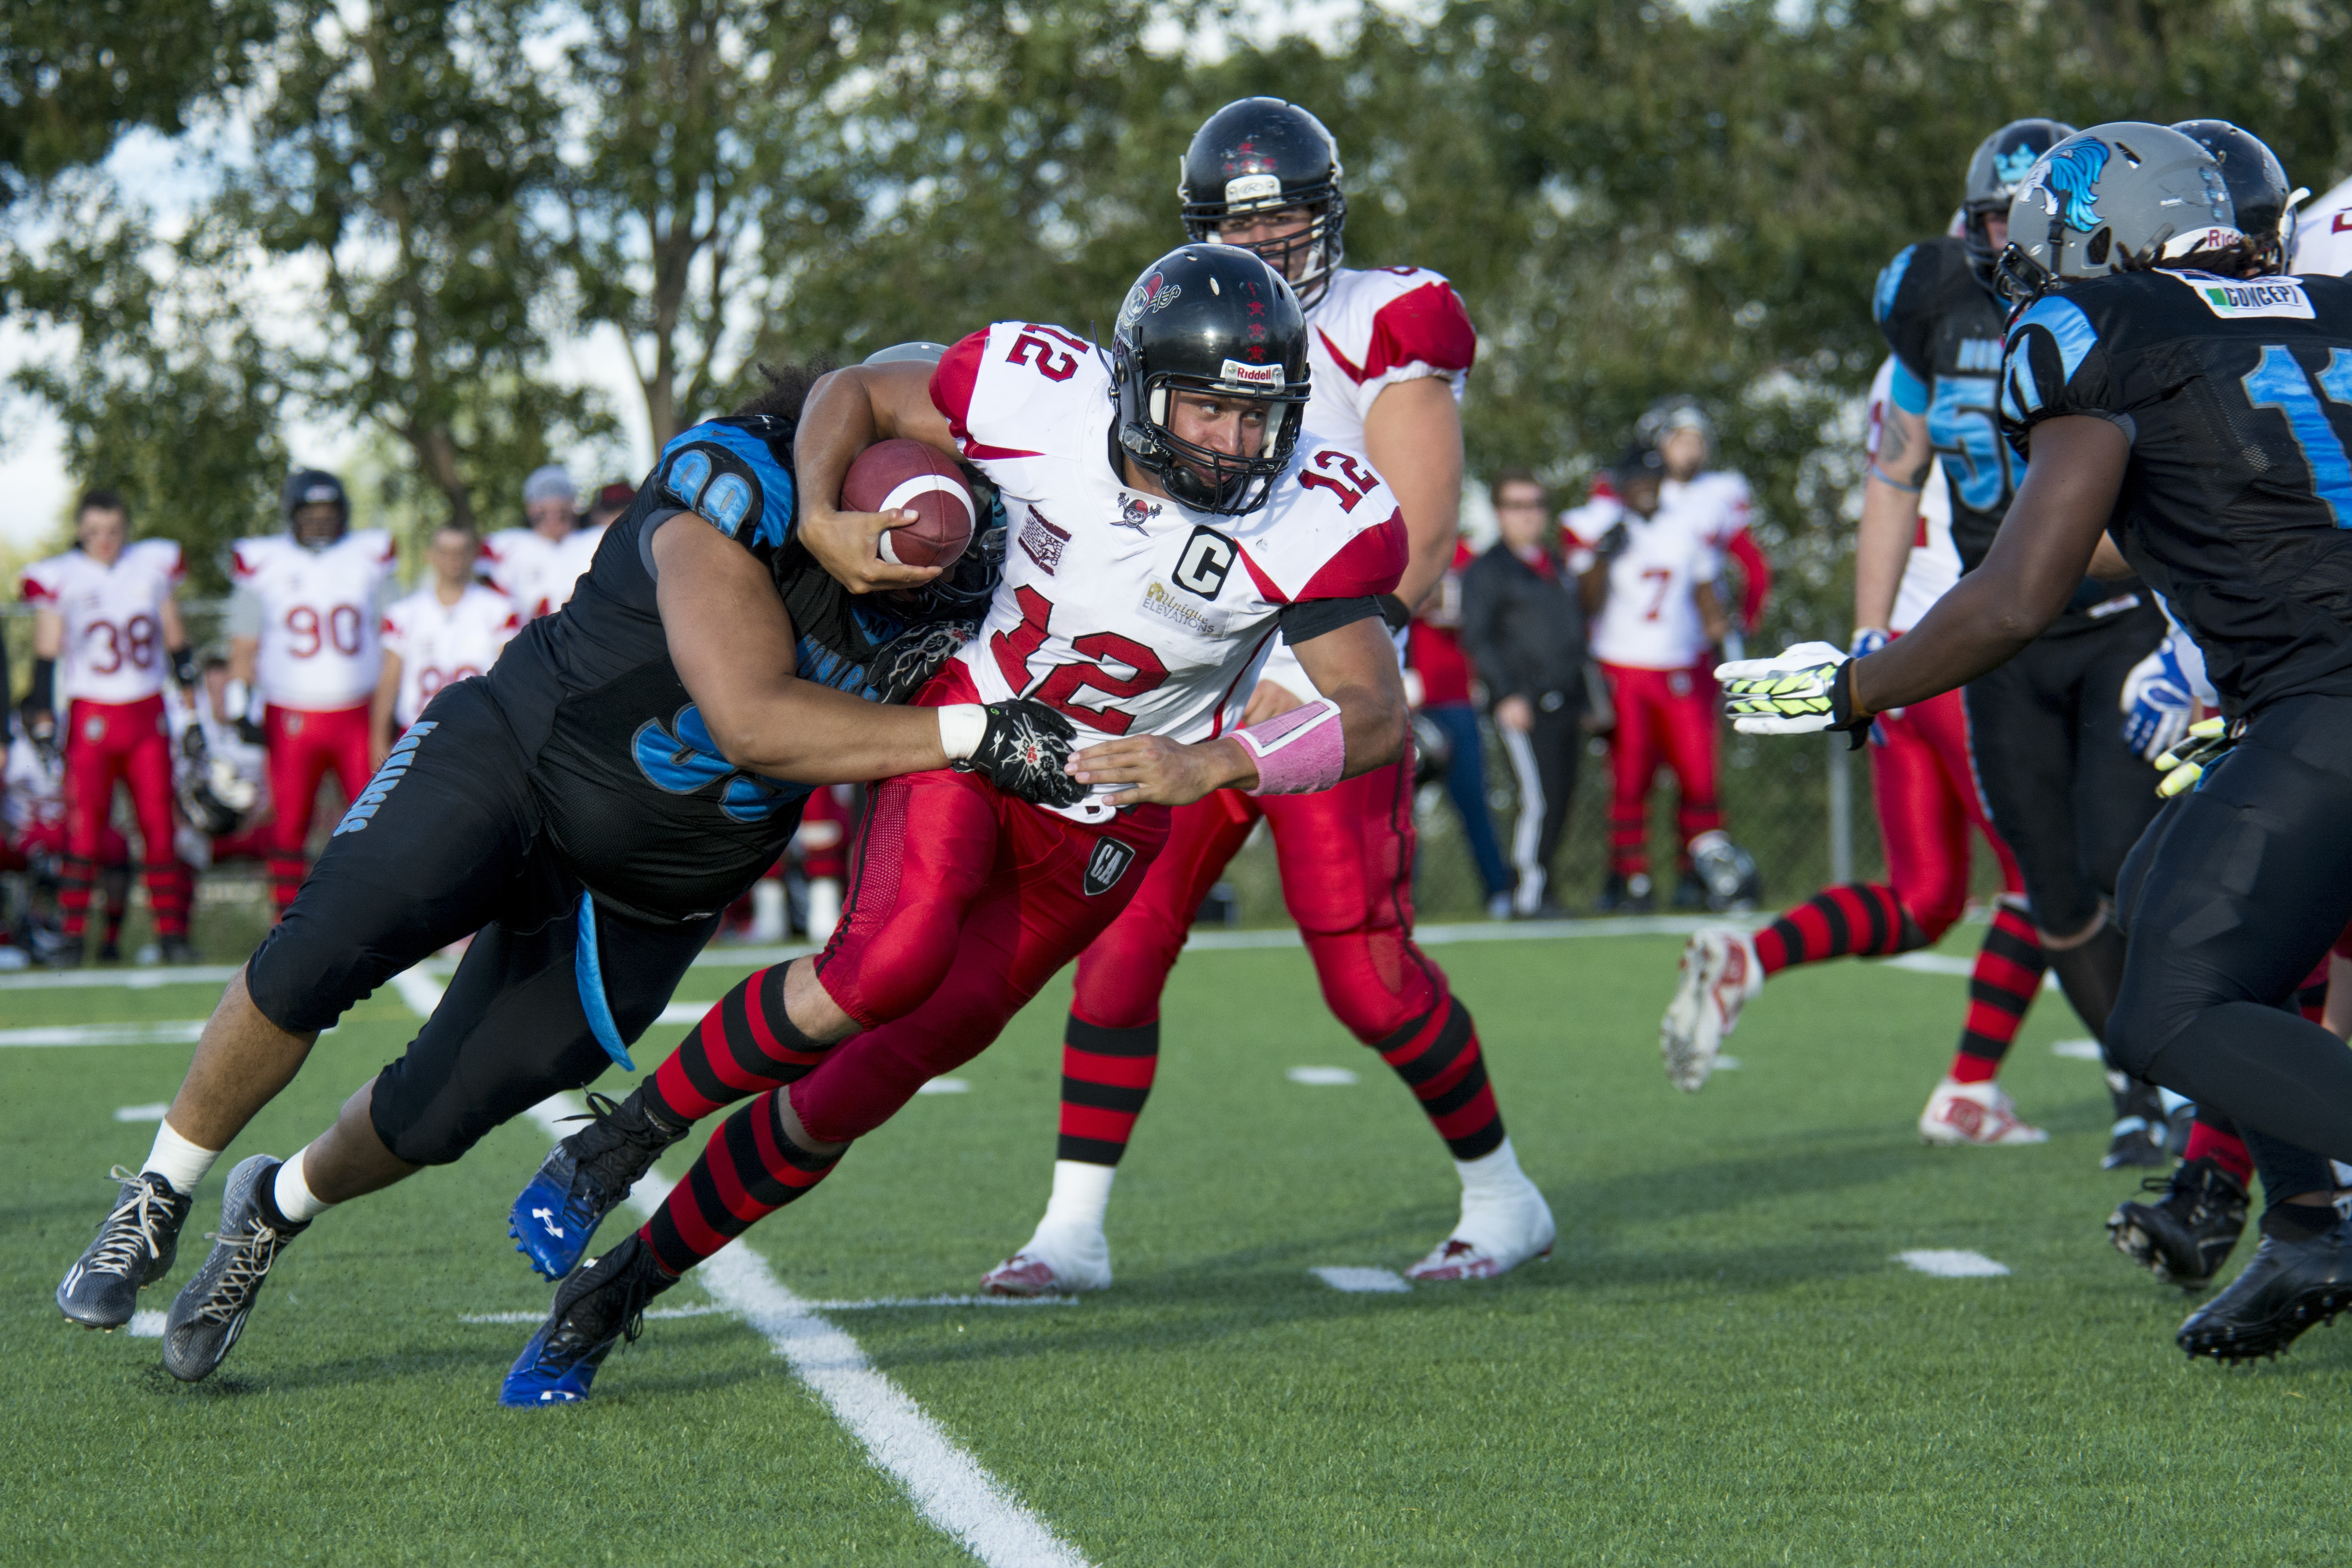 TOUGH GAME – Fort McMurray Monarchs defensive lineman Shaq Armstrong takes down Central Alberta Buccaneers quarterback Pascal Plante